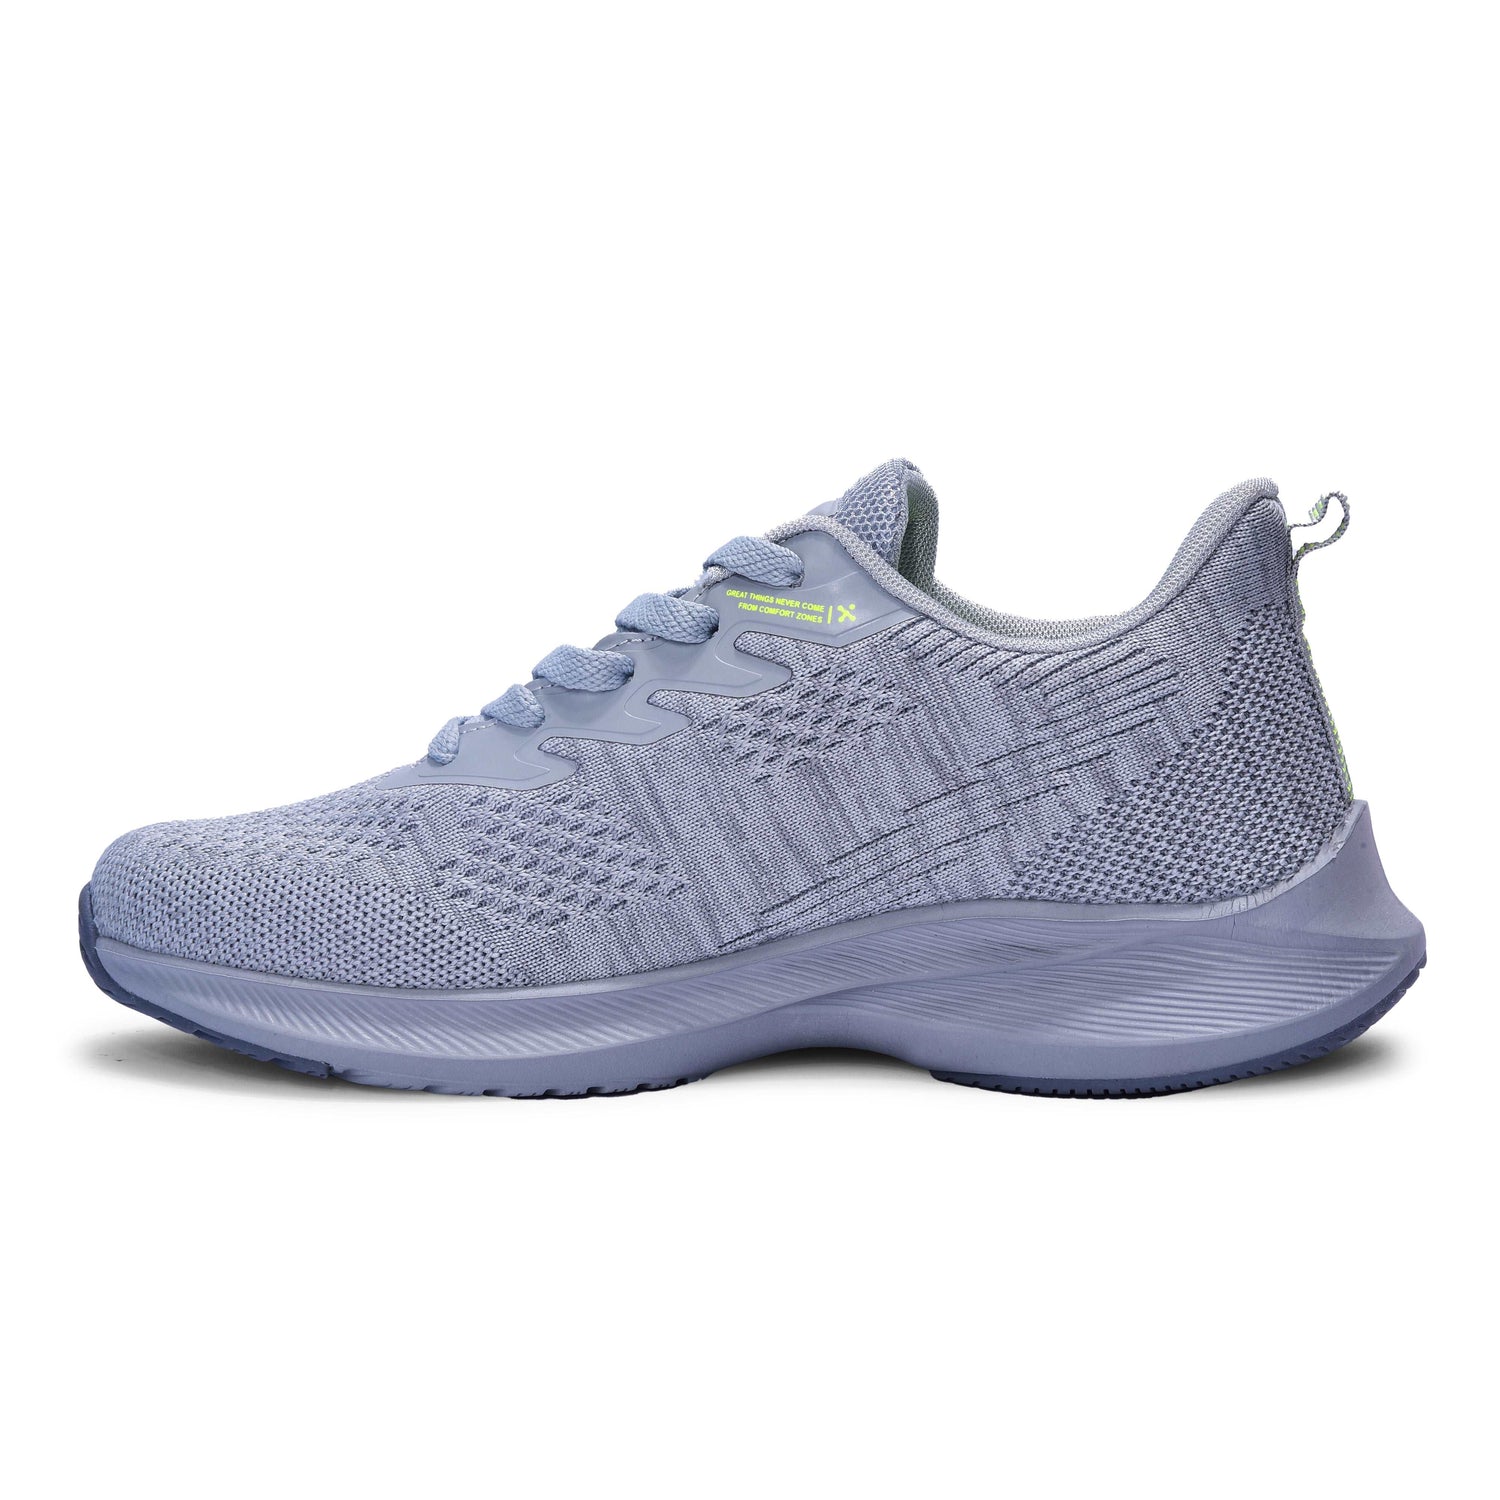 Calcetto CLT-0964 L Grey Lime Running Sports Shoe For Men